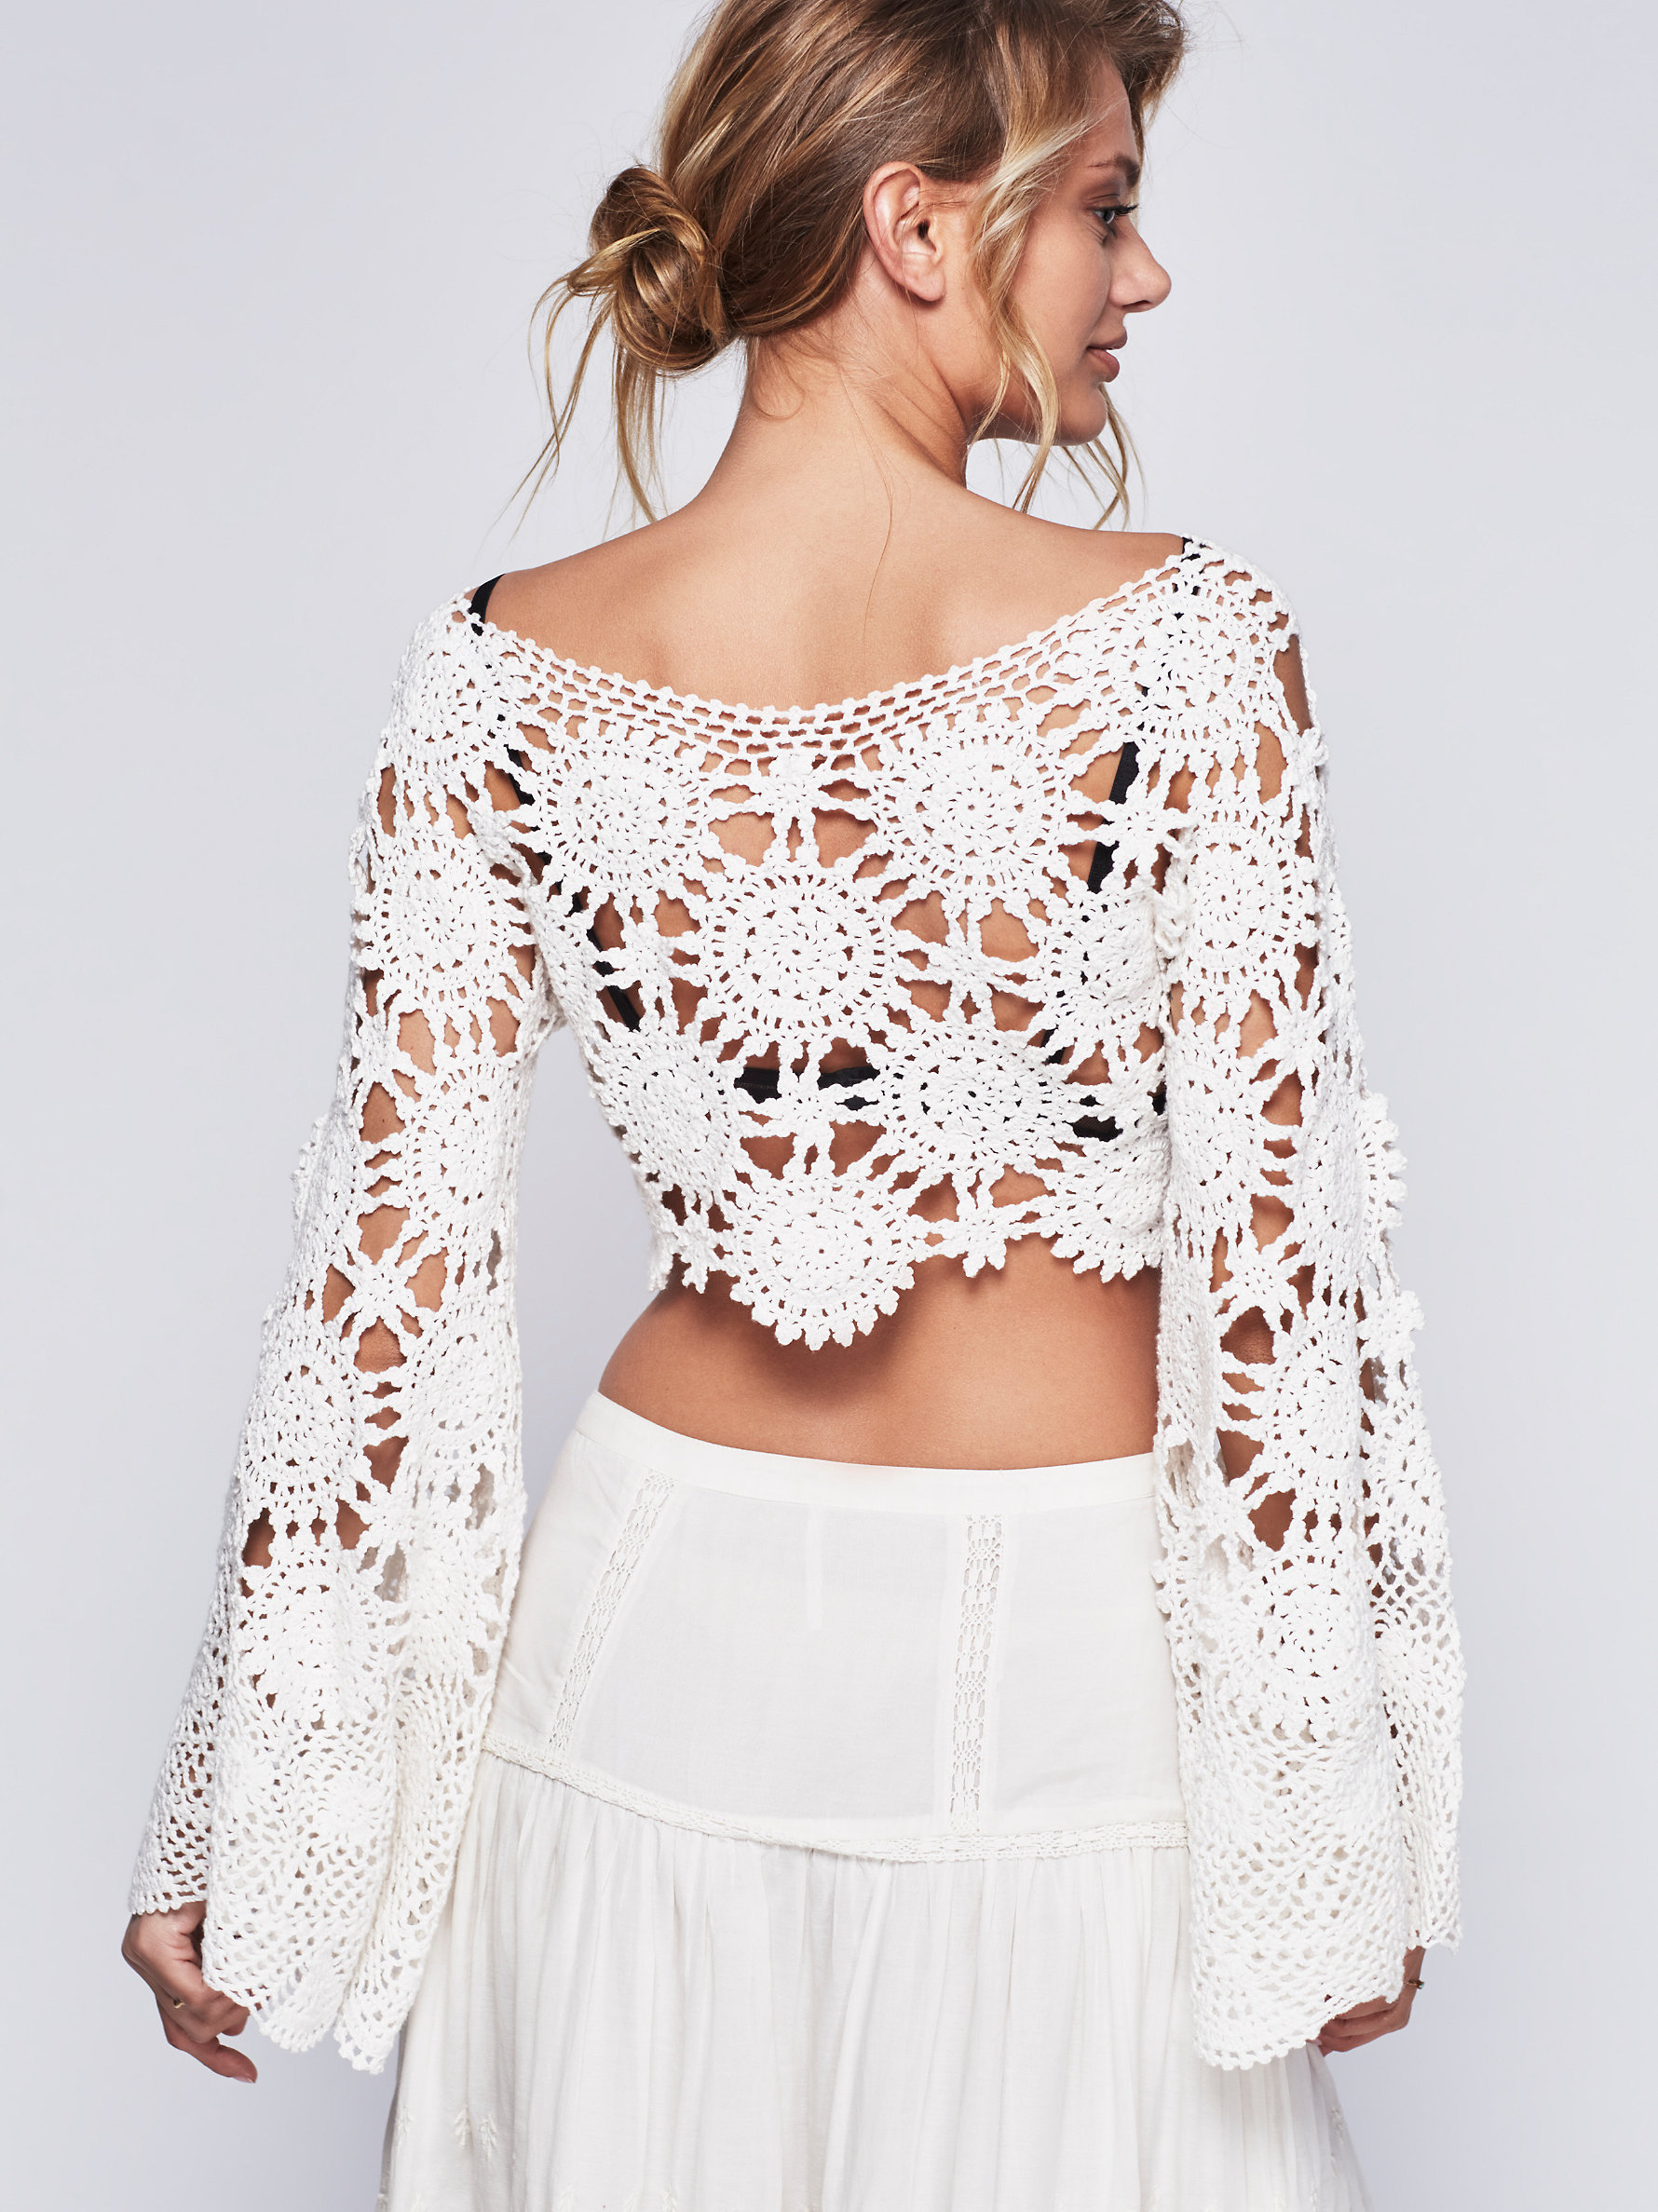 Free People Sunchaser Crochet Top in White